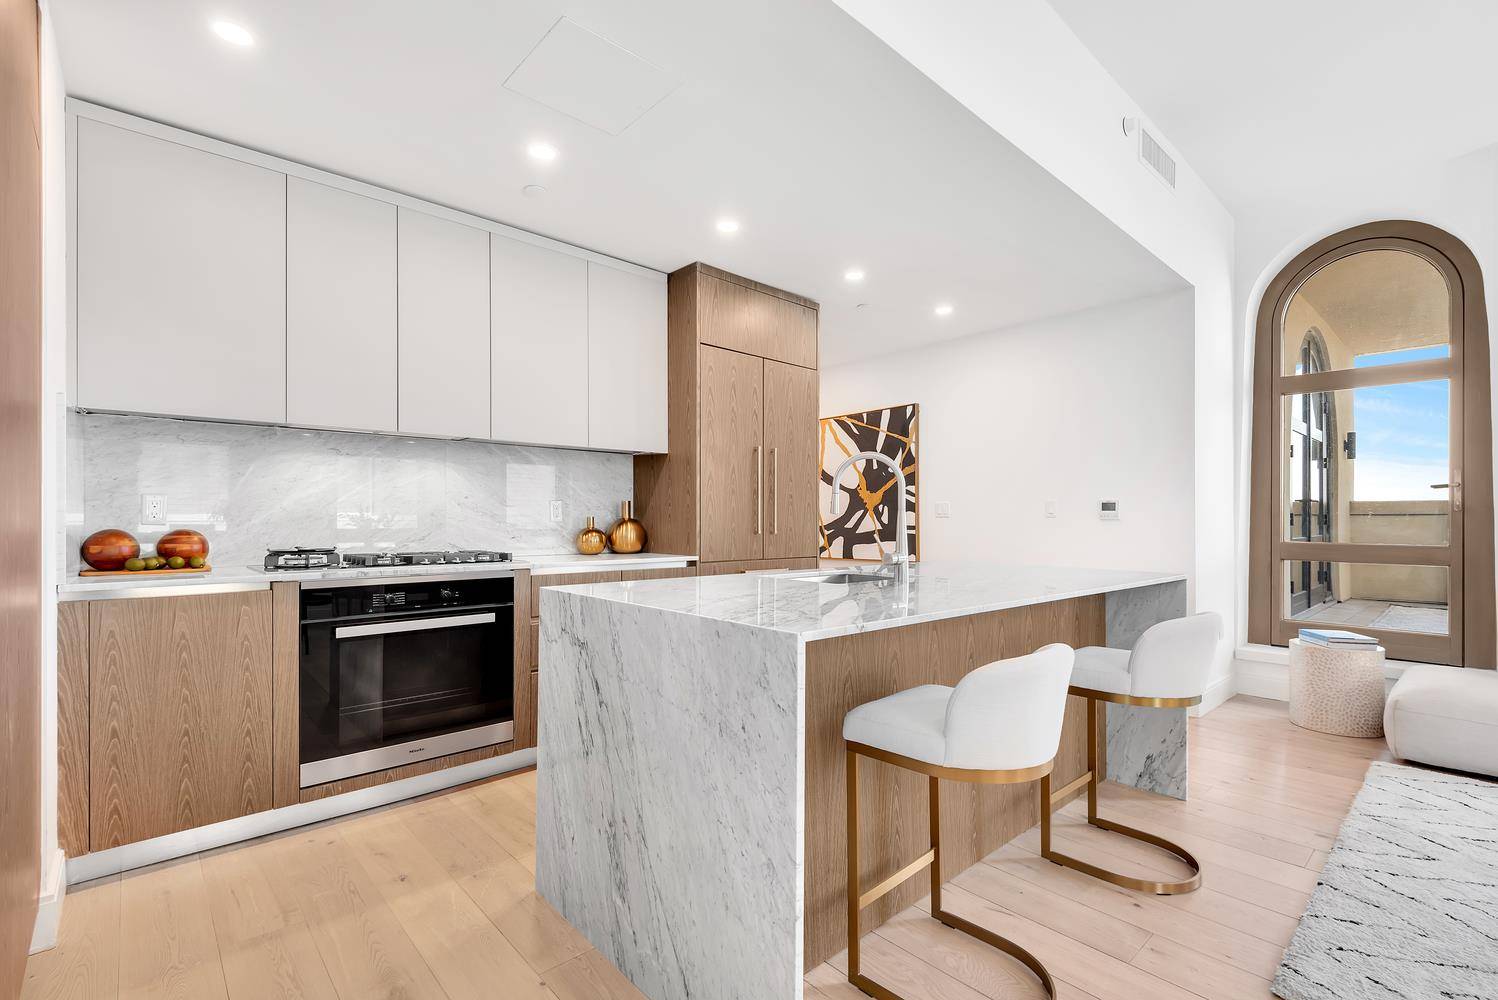 PENTHOUSE WITH PARKING amp ; STORAGE AVAILABLE Fine design meets glorious outdoor space in this exquisite modern home at Luna Gowanus, a distinctive collection of 39 luxury condo residences by ...